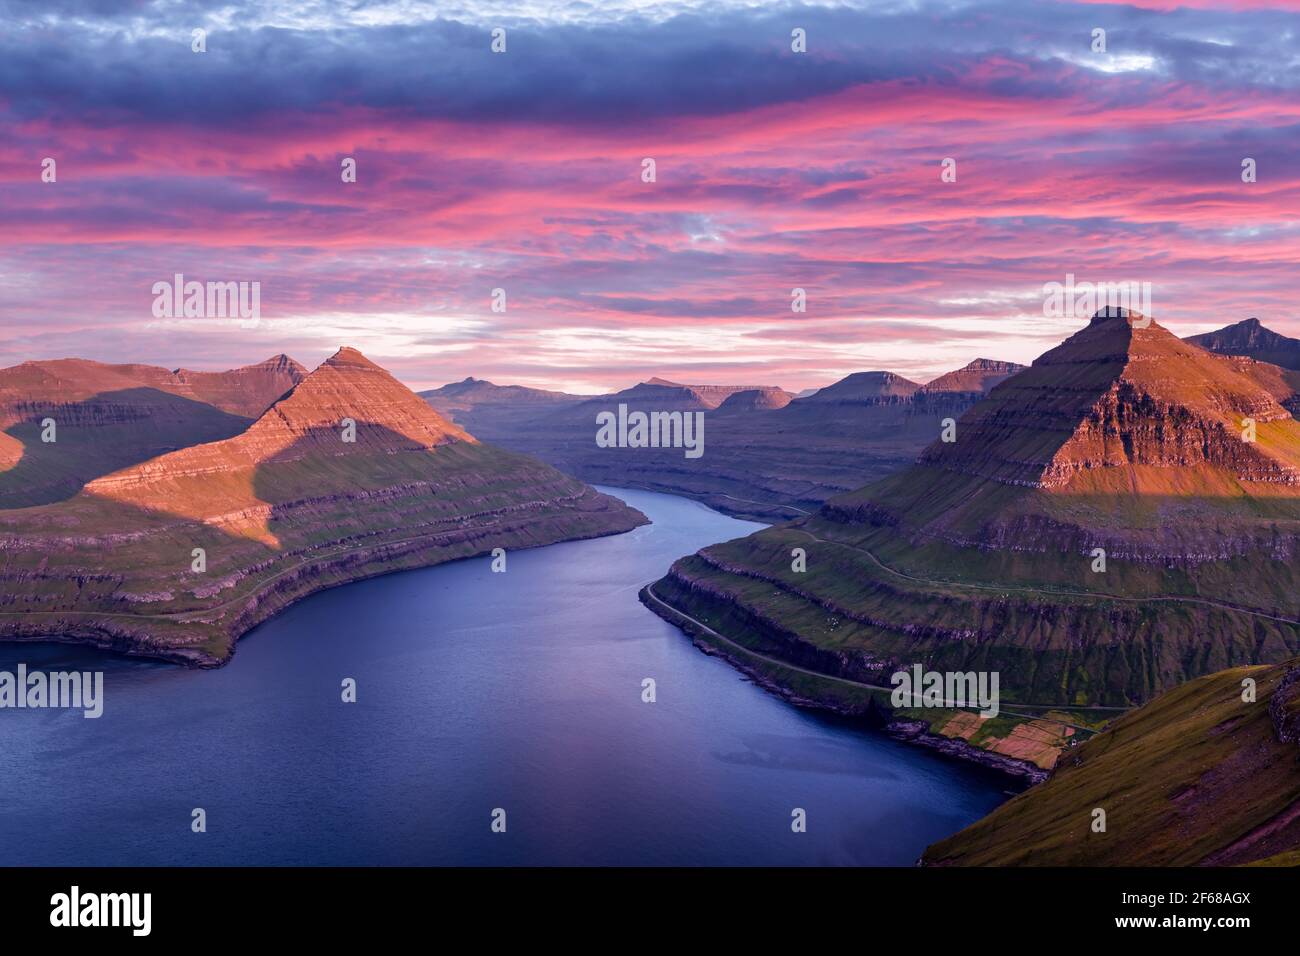 Incredible purple sunset over majestic fjords of Funningur Stock Photo